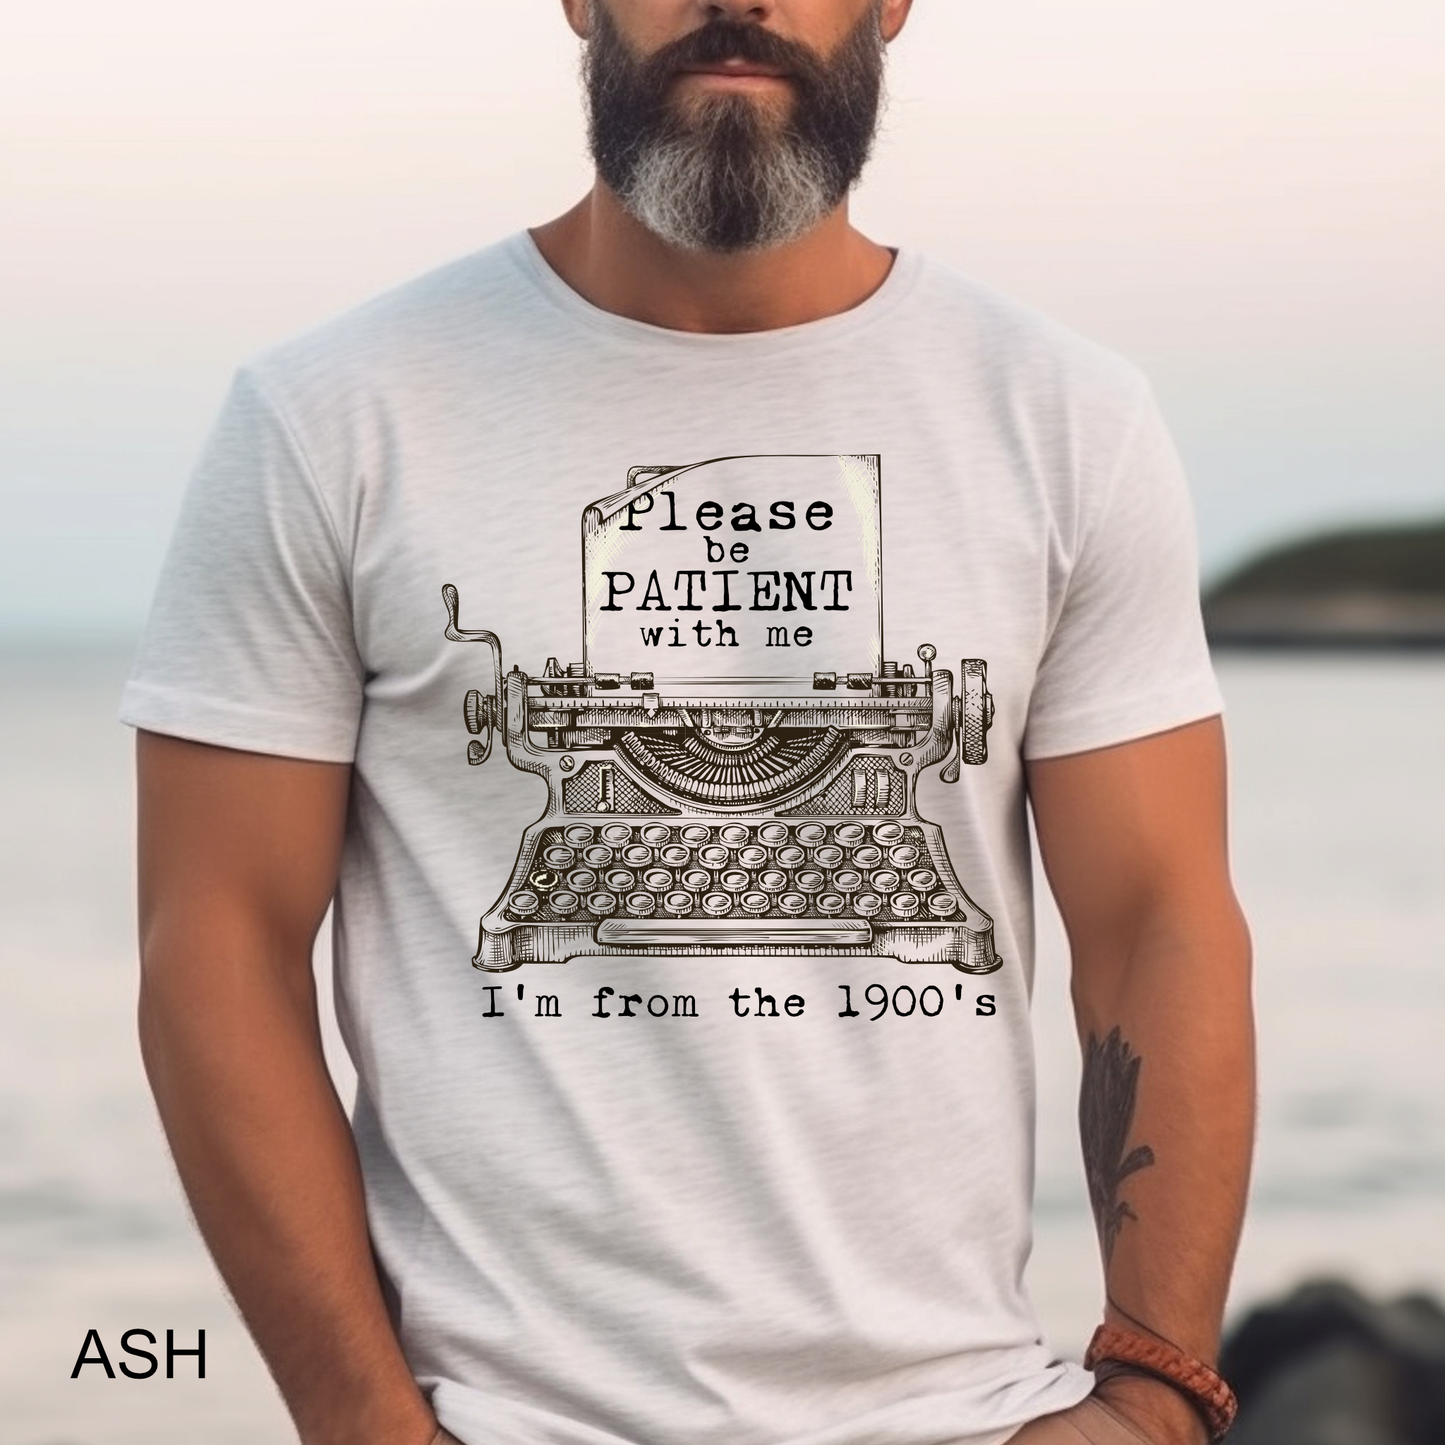 Vintage Typewriter | Born in the 1900's | Funny Graphic Tee | Birthday Shirt